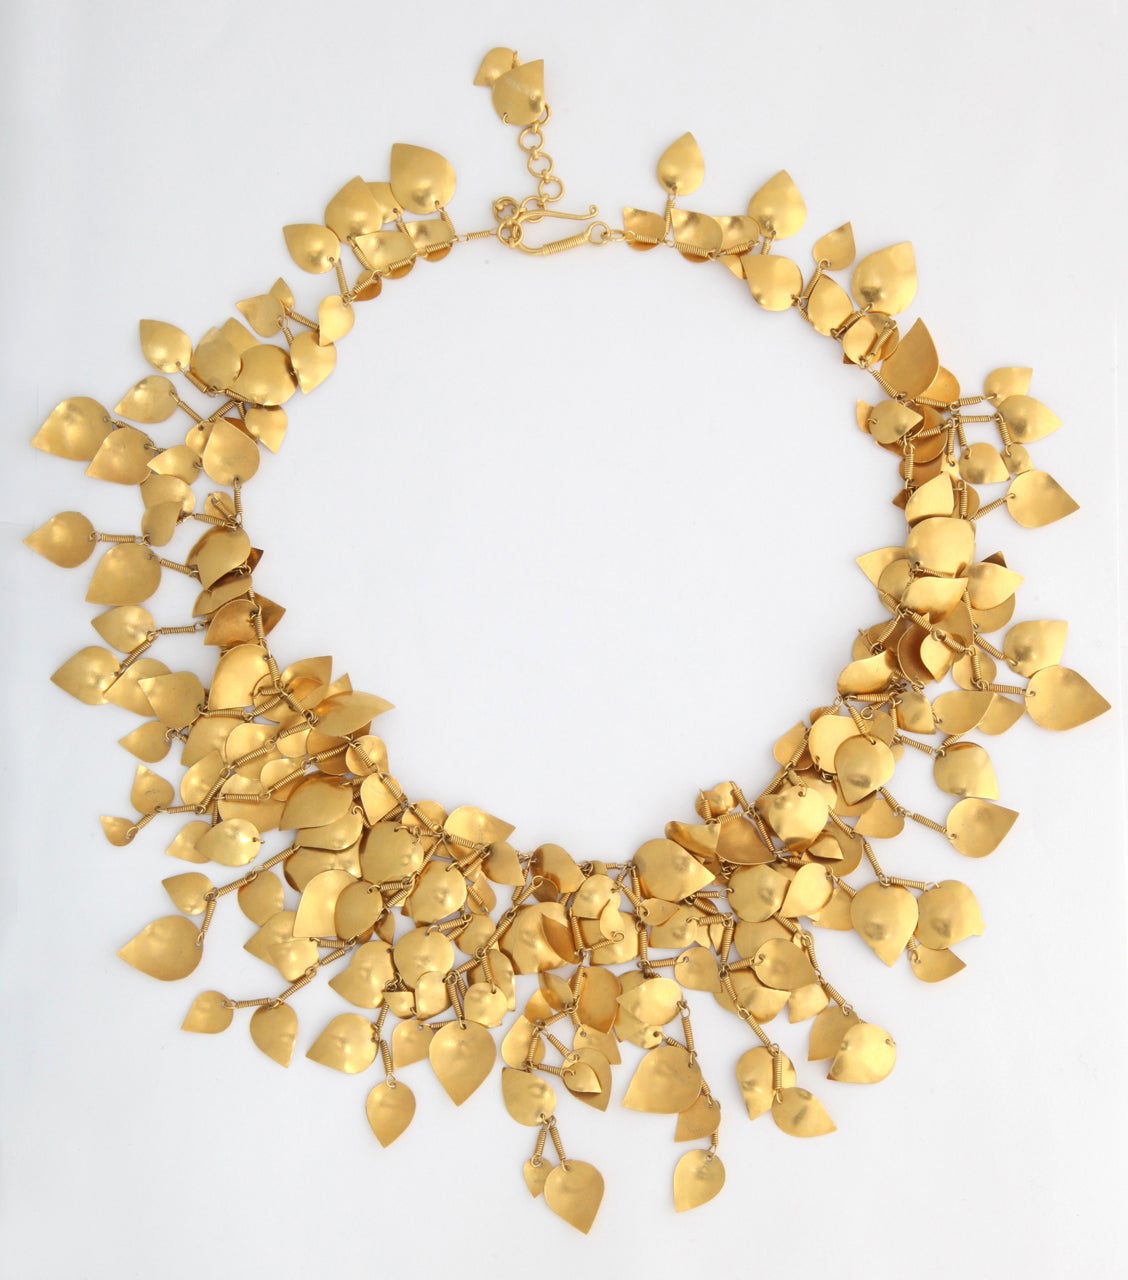 Contemporary Gold Leaf Wreath Necklace